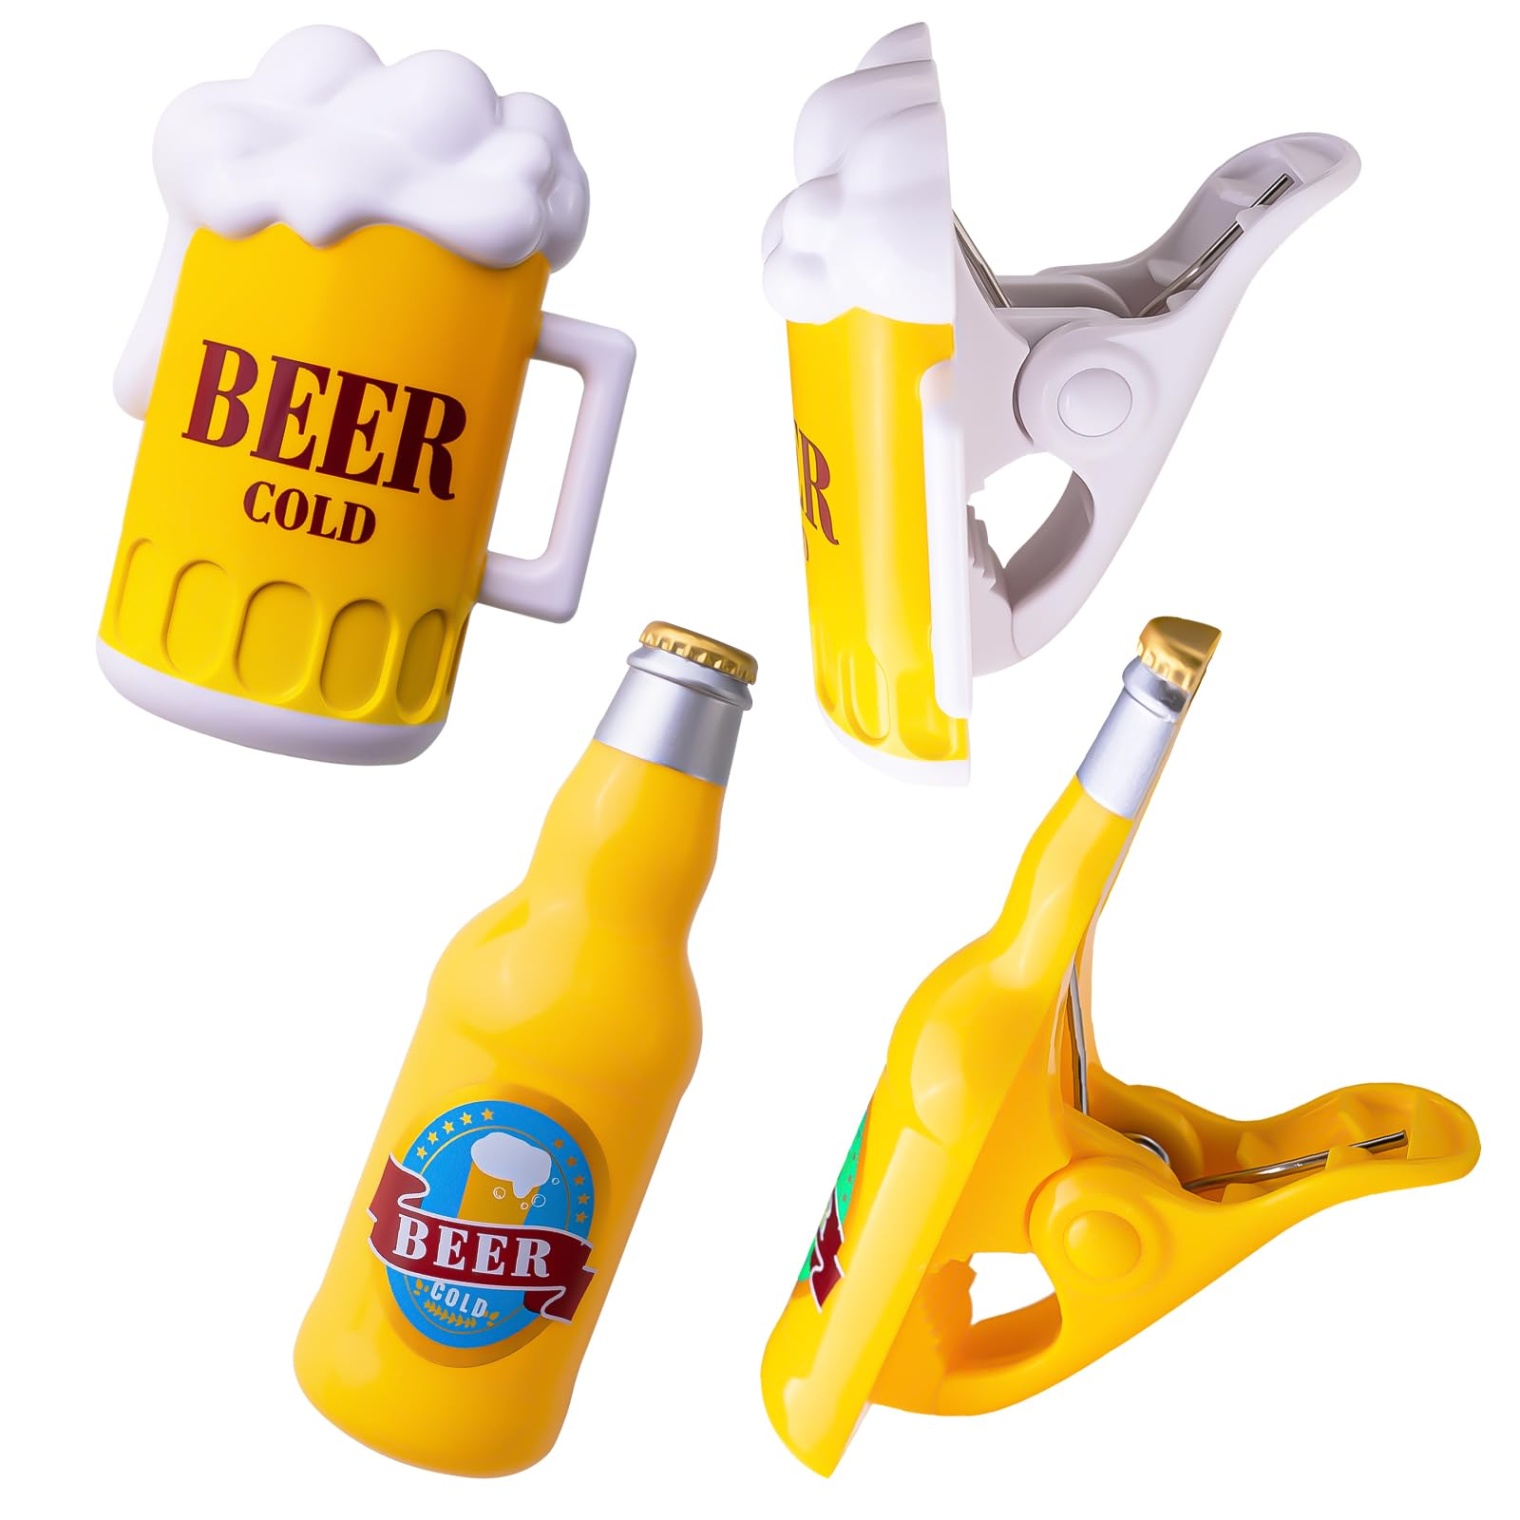 accessories for beer Bulan 2 Beer Beach Towel Clips Set of , Beer Bottles Towel Clips for Beach Chairs,  Funny Windproof Clothespins for Patio and Pool Accessories - Your Cruise